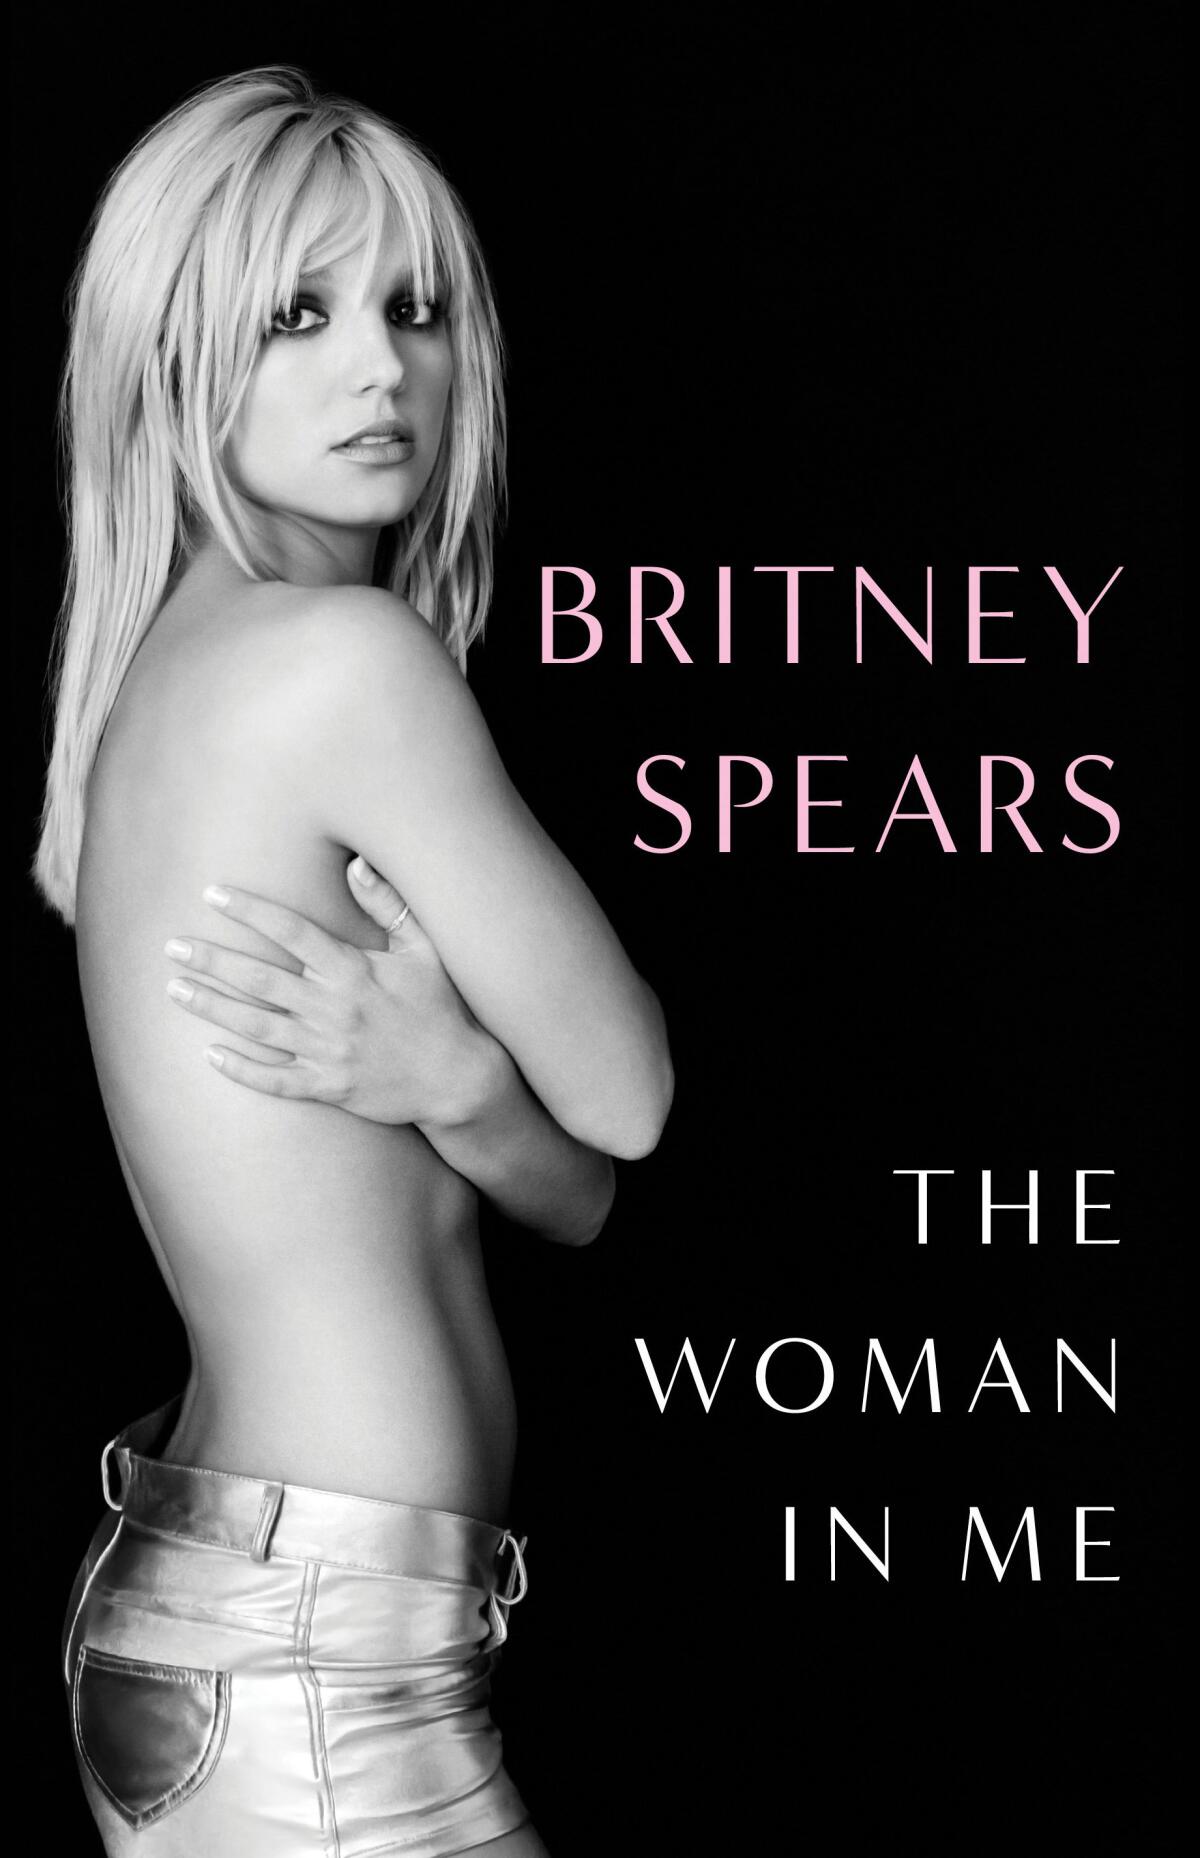 "The Woman in Me," by Britney Spears